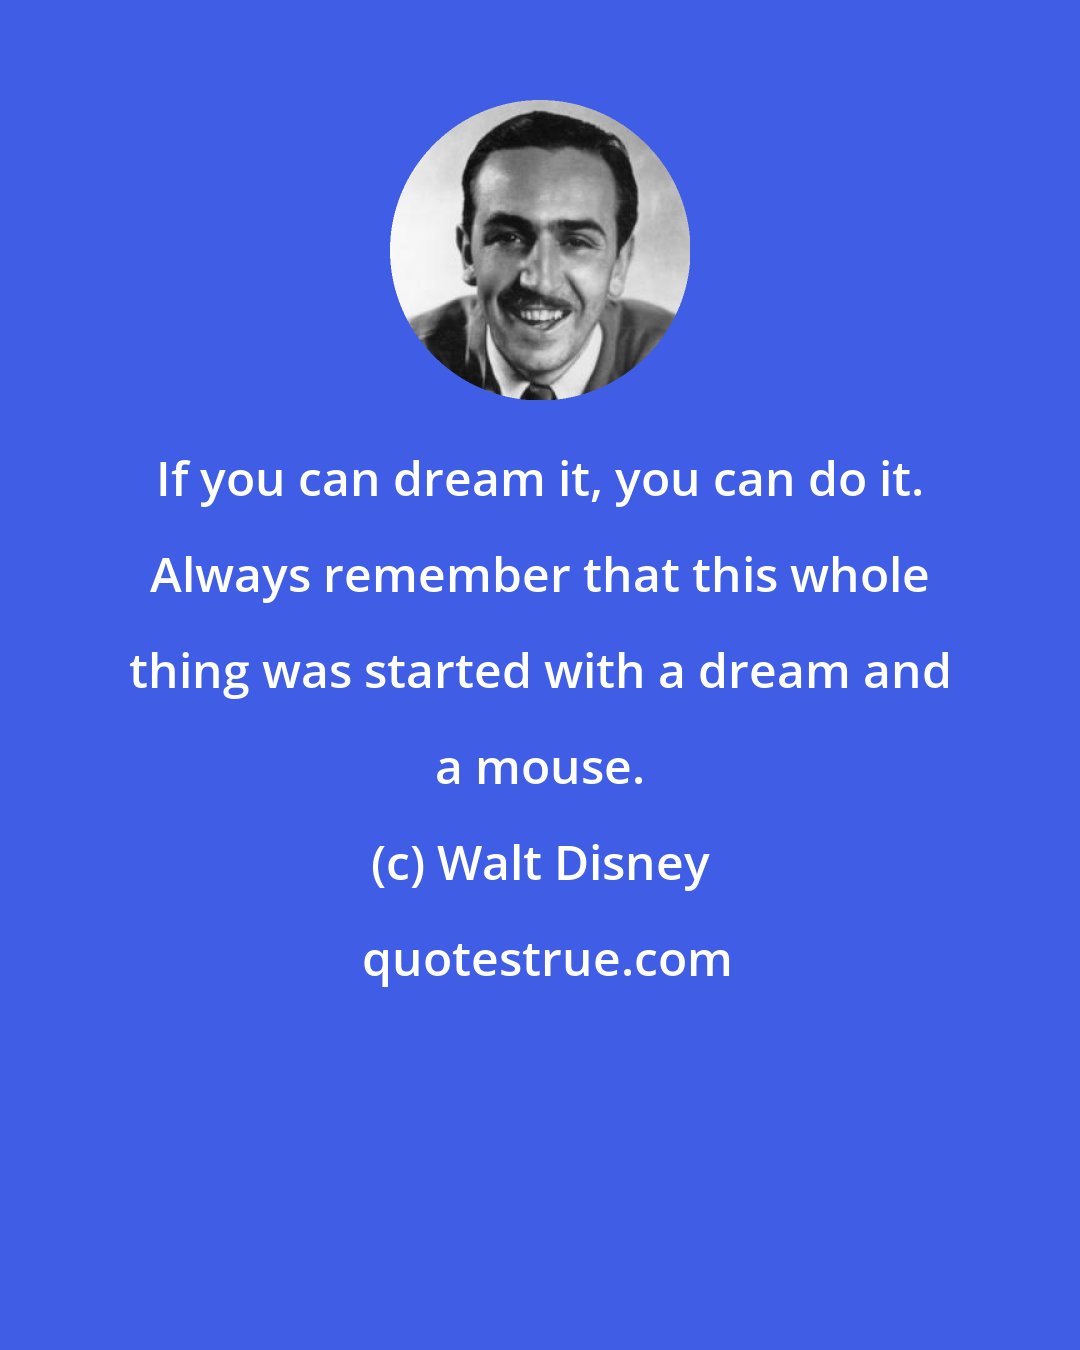 Walt Disney: If you can dream it, you can do it. Always remember that this whole thing was started with a dream and a mouse.